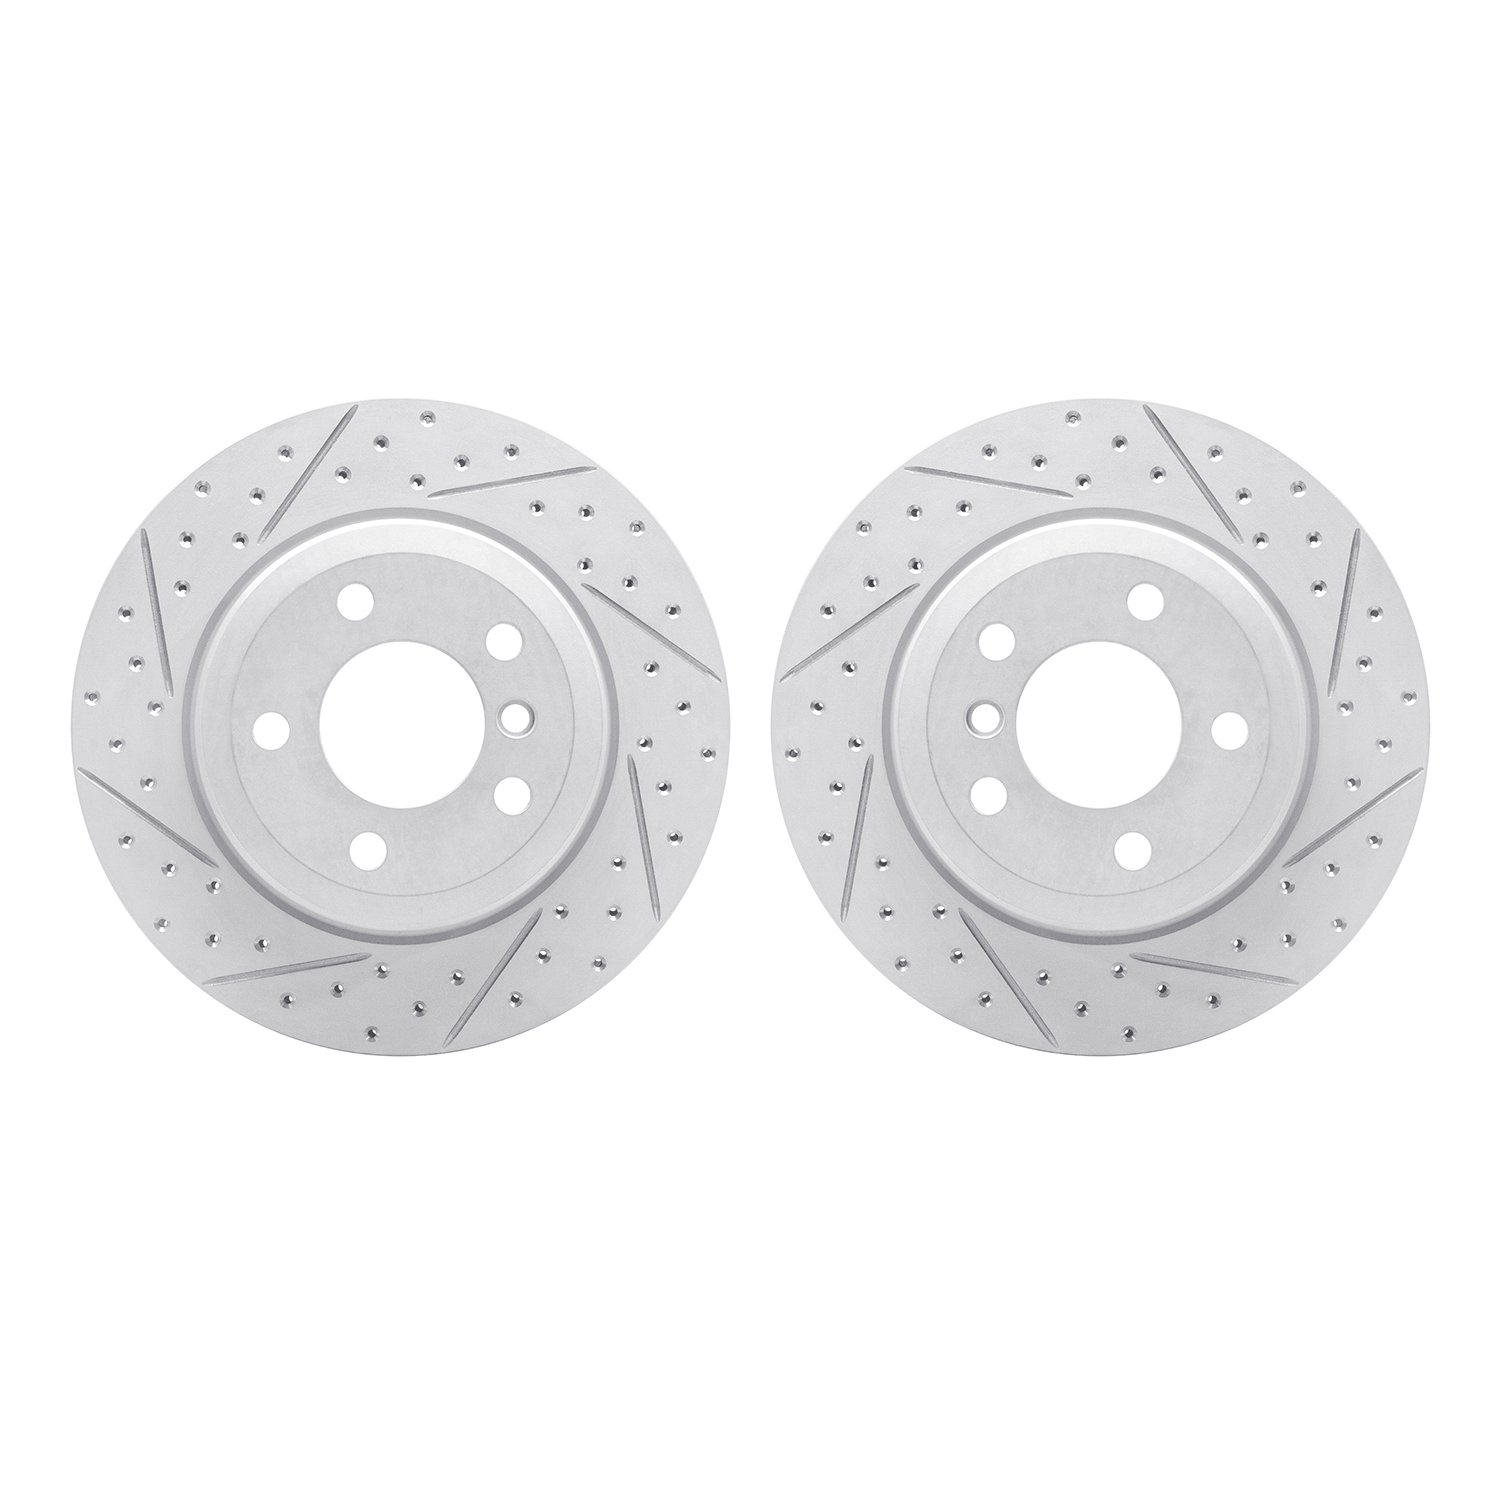 2002-31094 Geoperformance Drilled/Slotted Brake Rotors, 2007-2019 BMW, Position: Rear